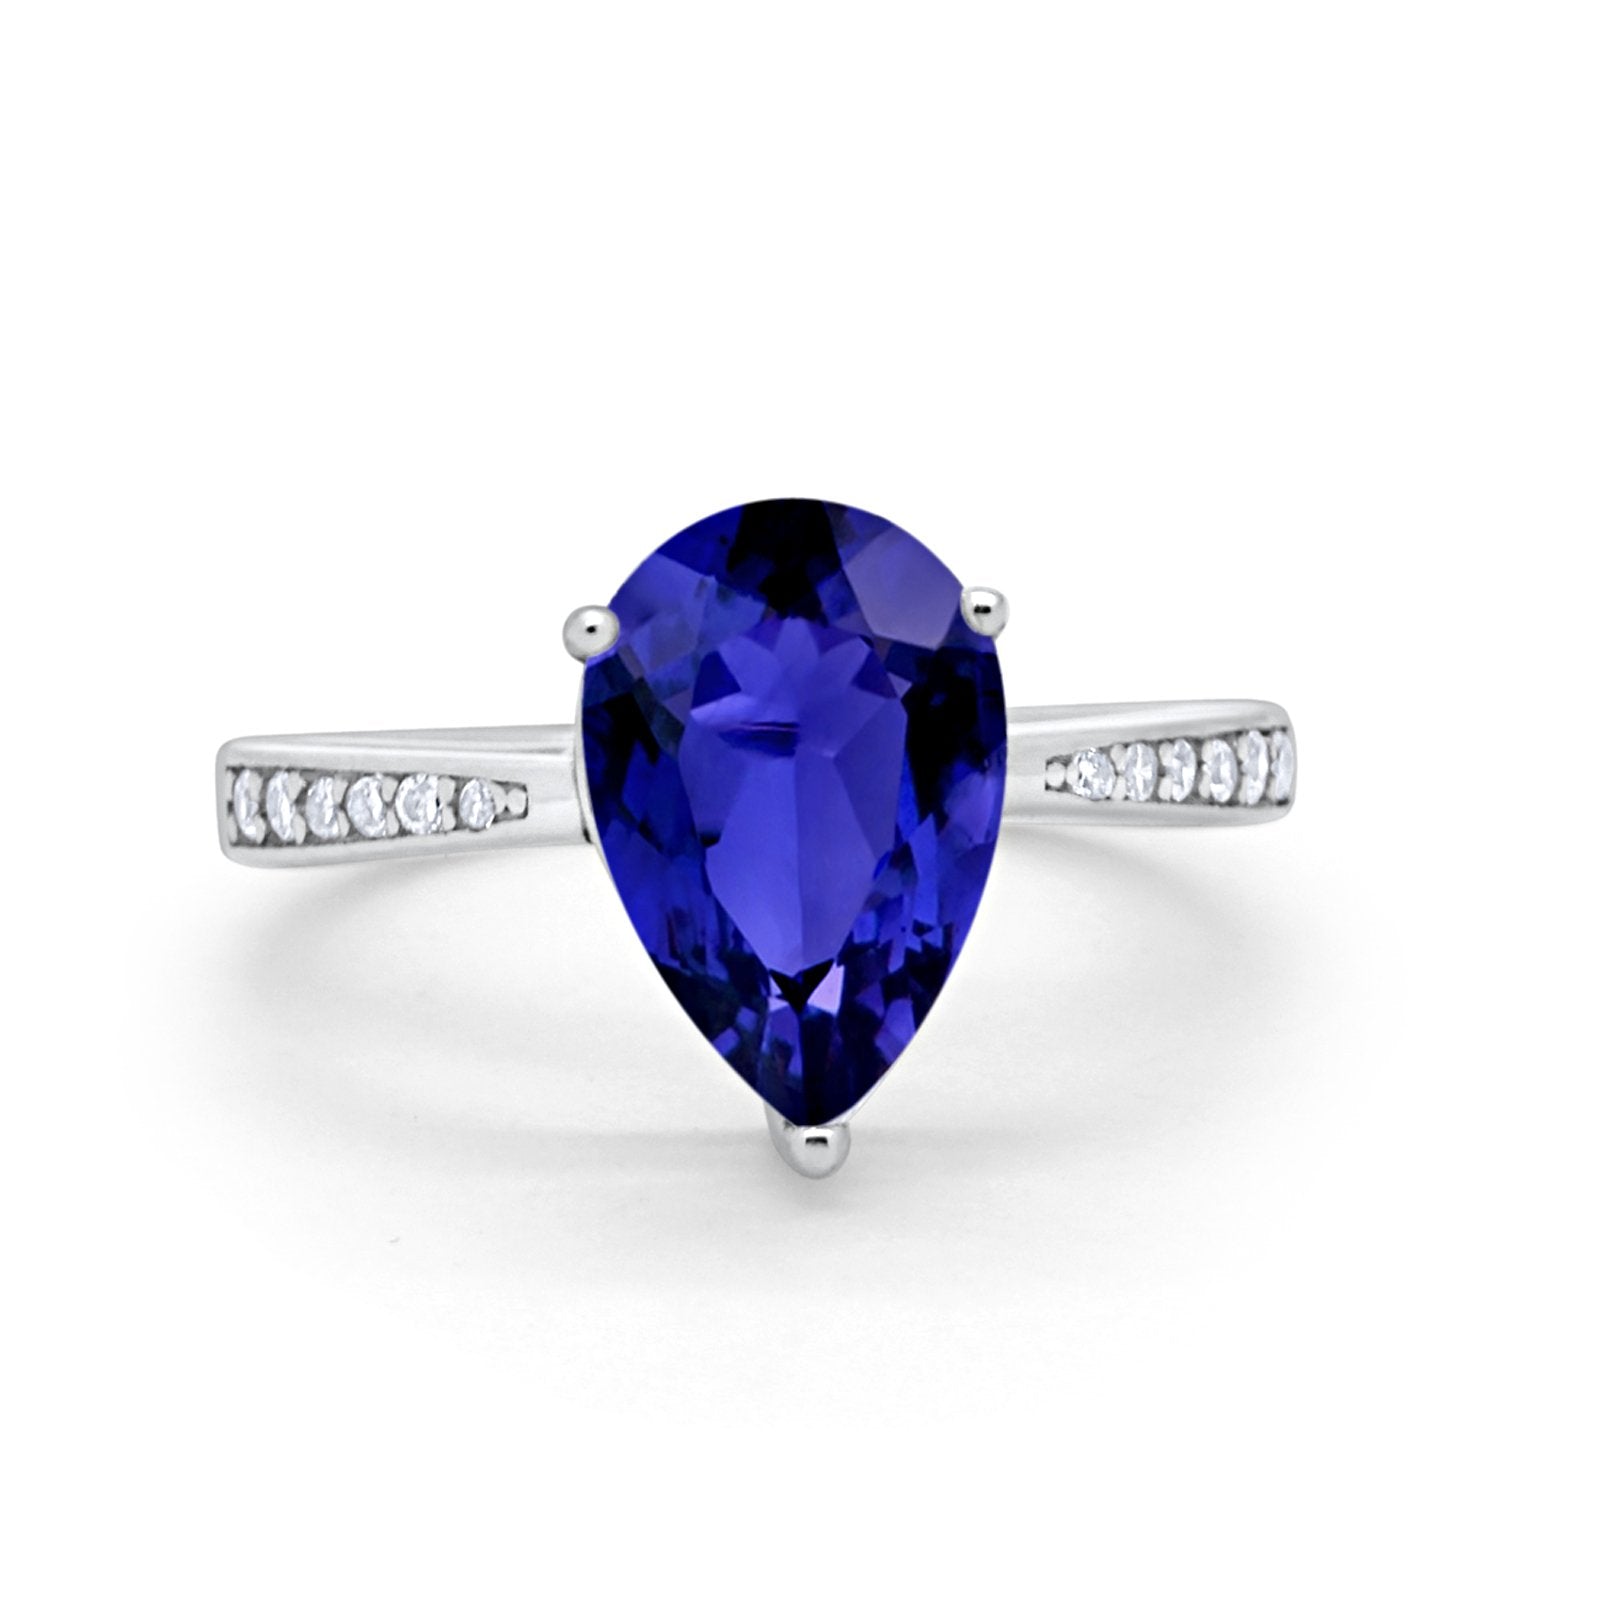 Teardrop Pear Bridal Ring Round Simulated Blue Sapphire CZ 925 Sterling Silver